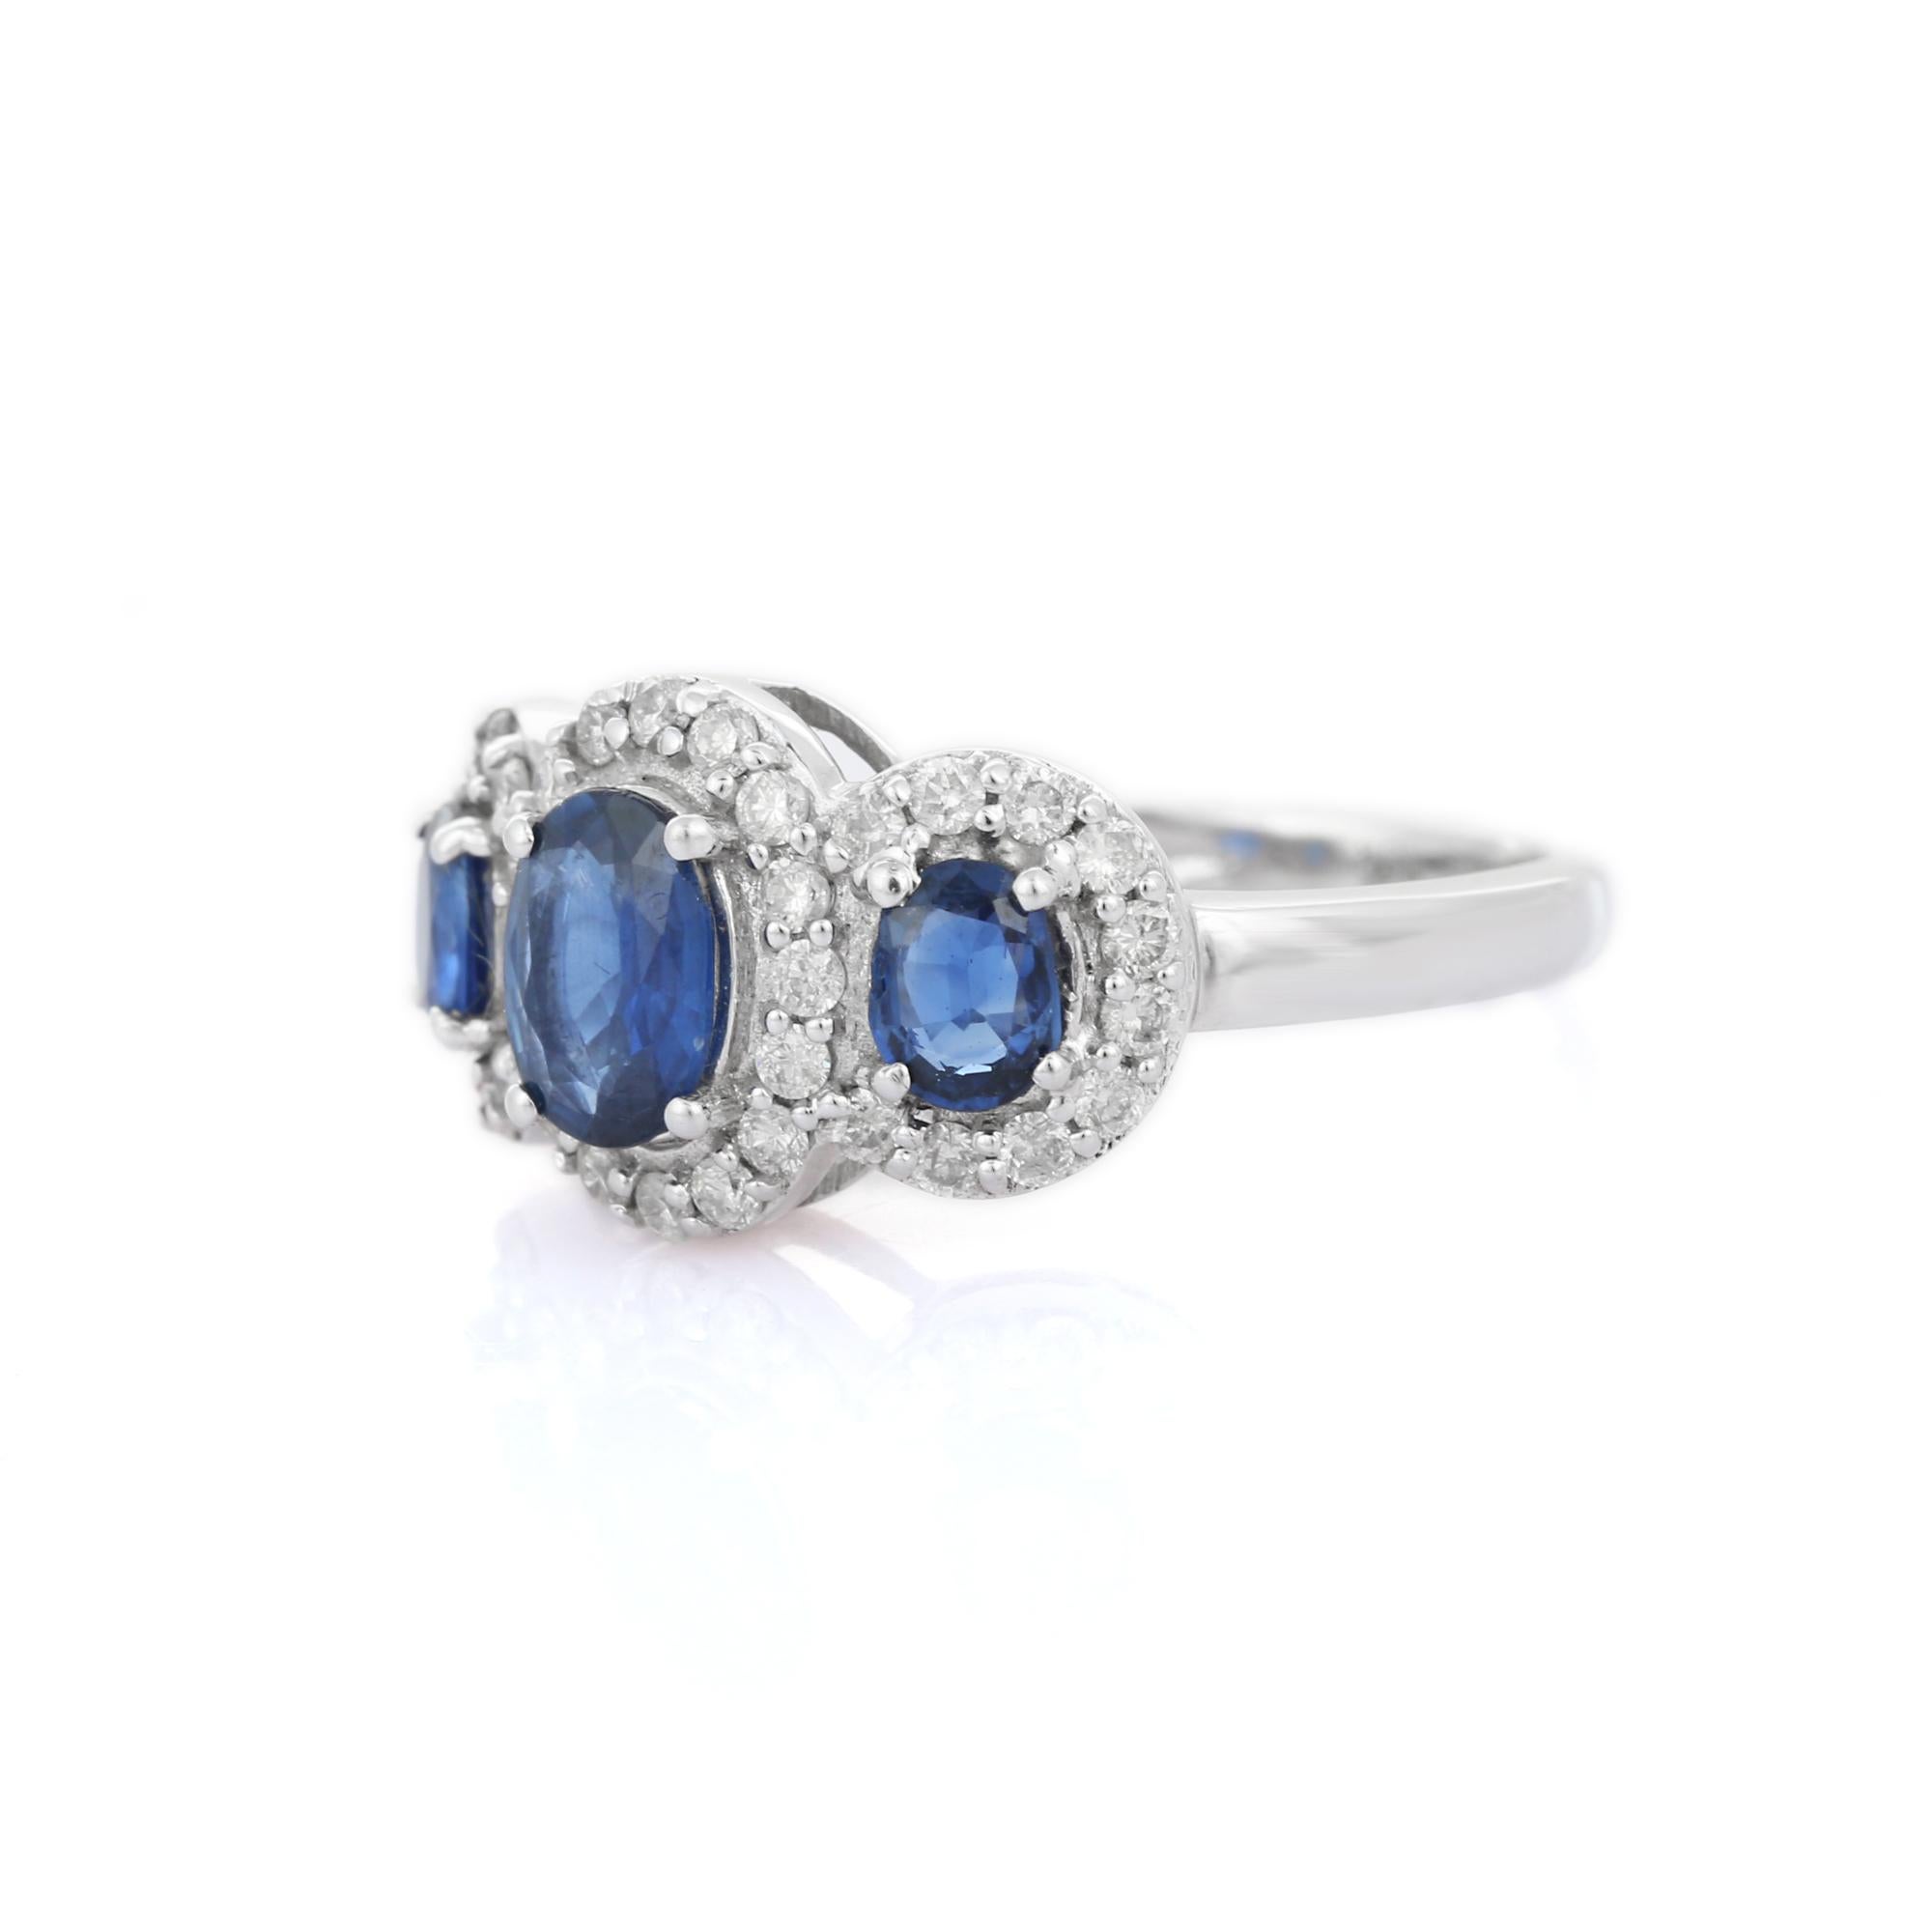 For Sale:  18k Solid White Gold Halo Diamond and Blue Sapphire Three-Stone Engagement Ring 4